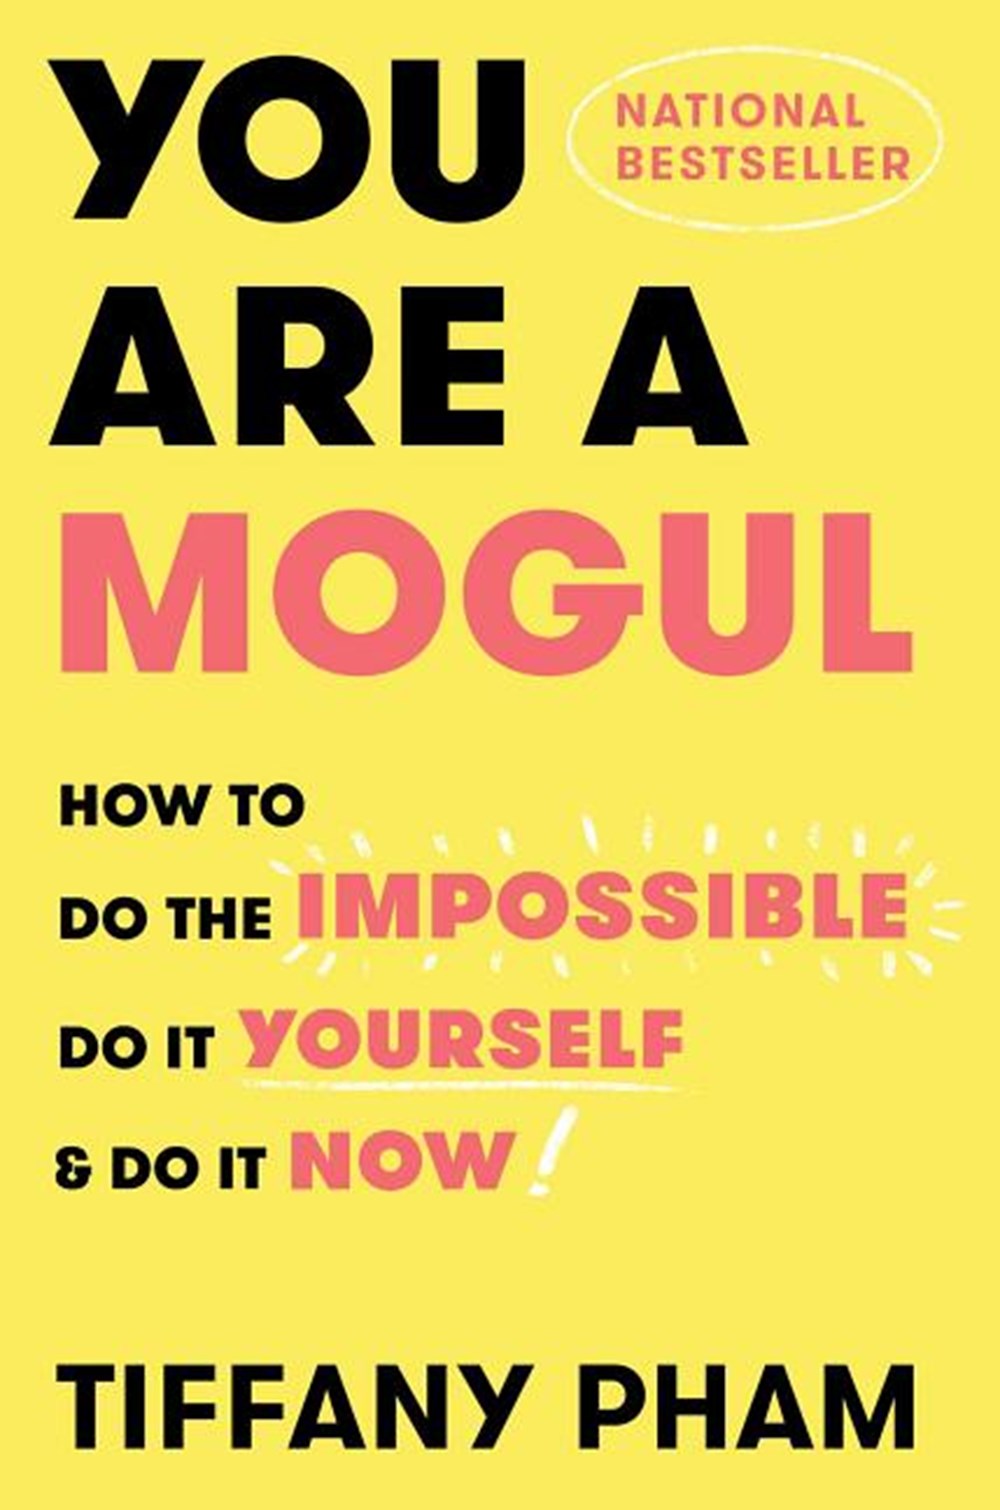 You Are a Mogul How to Do the Impossible, Do It Yourself, and Do It Now